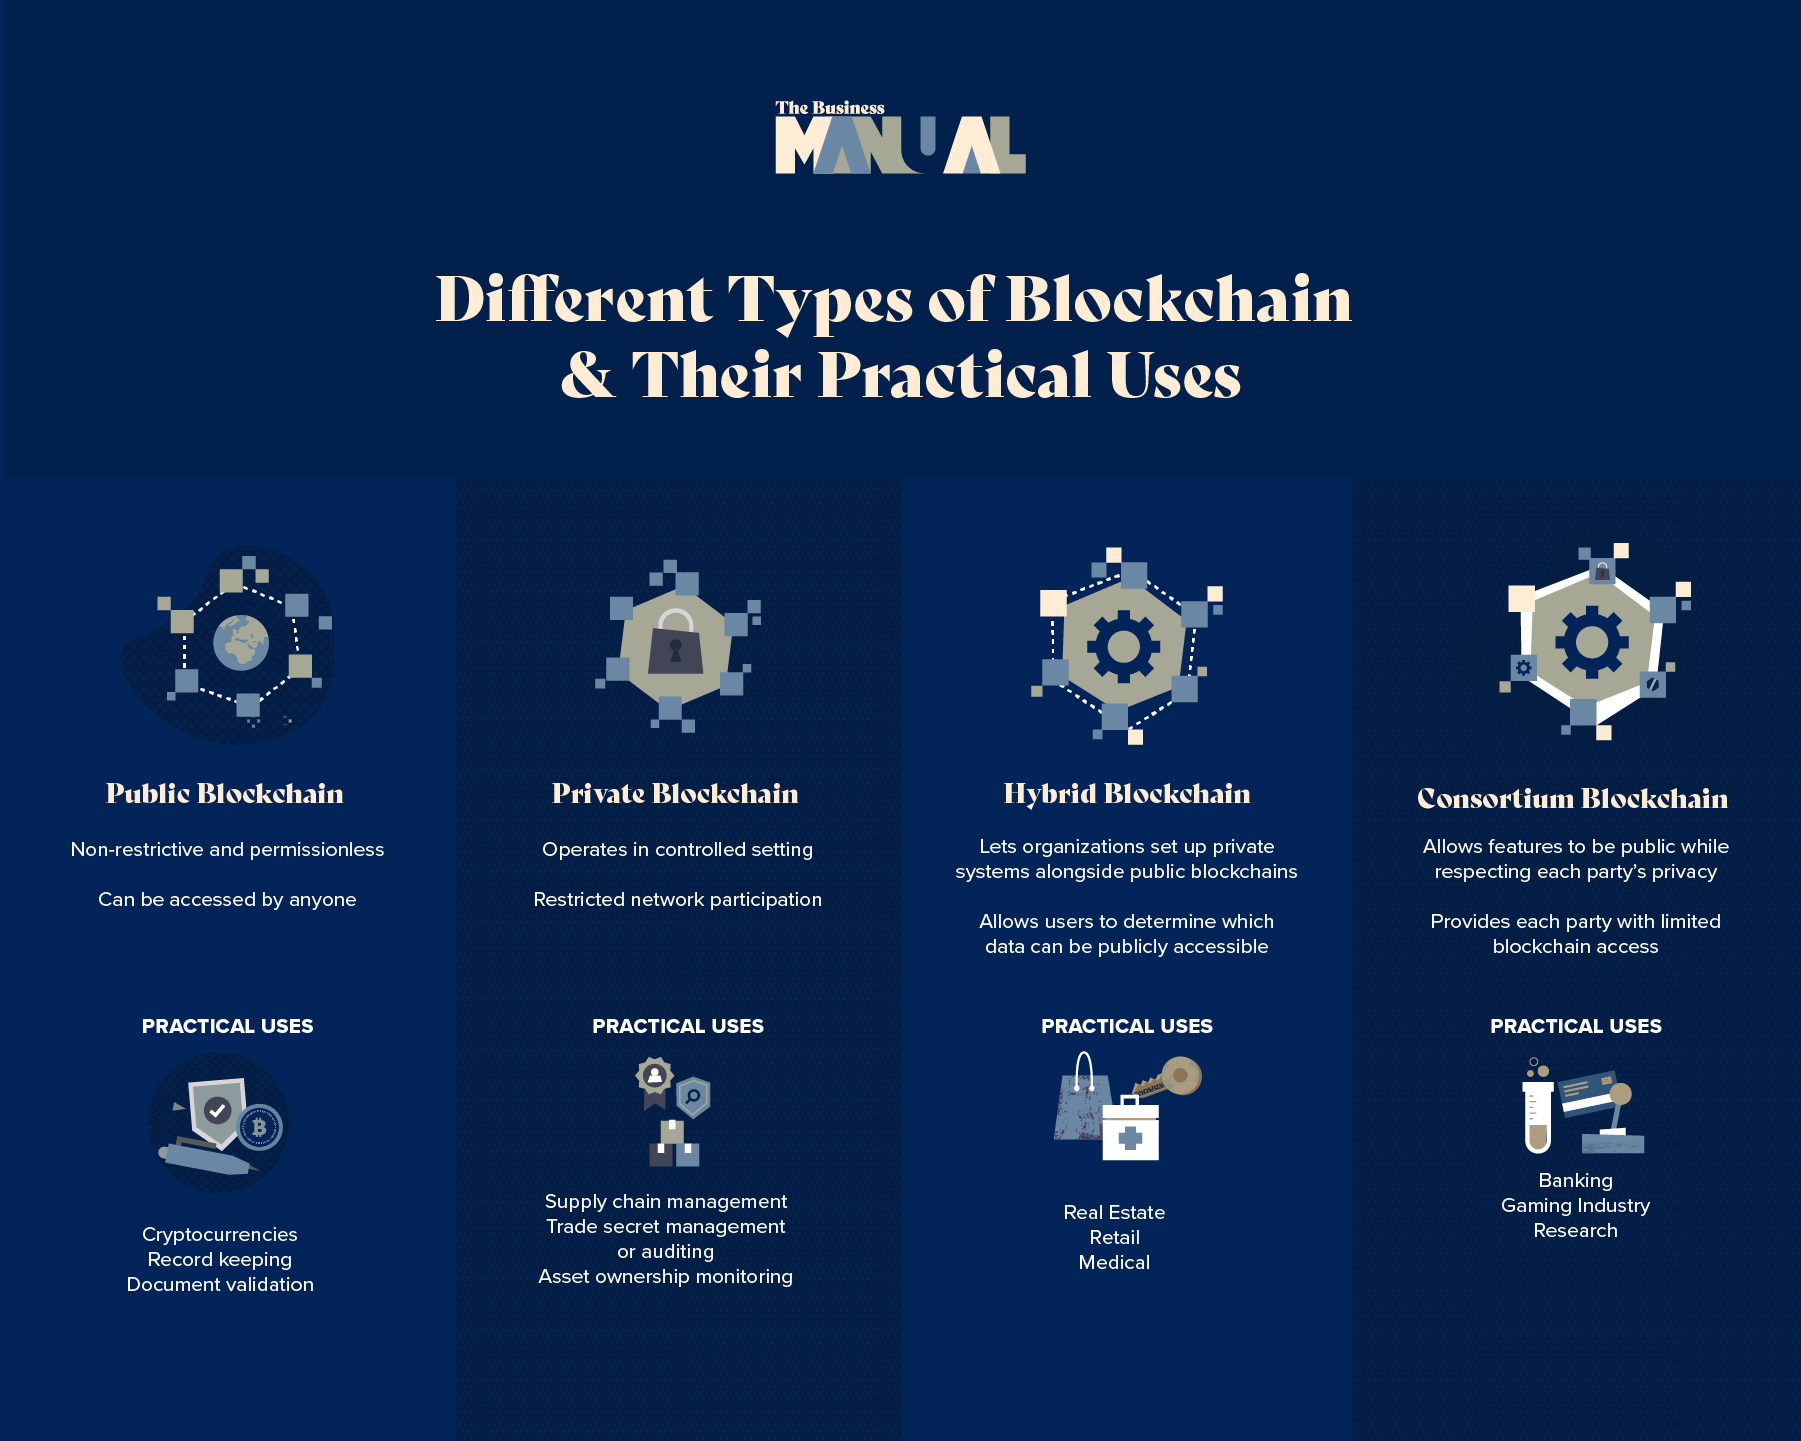 Different Types, Pros, Cons, and Practical Uses of Blockchain